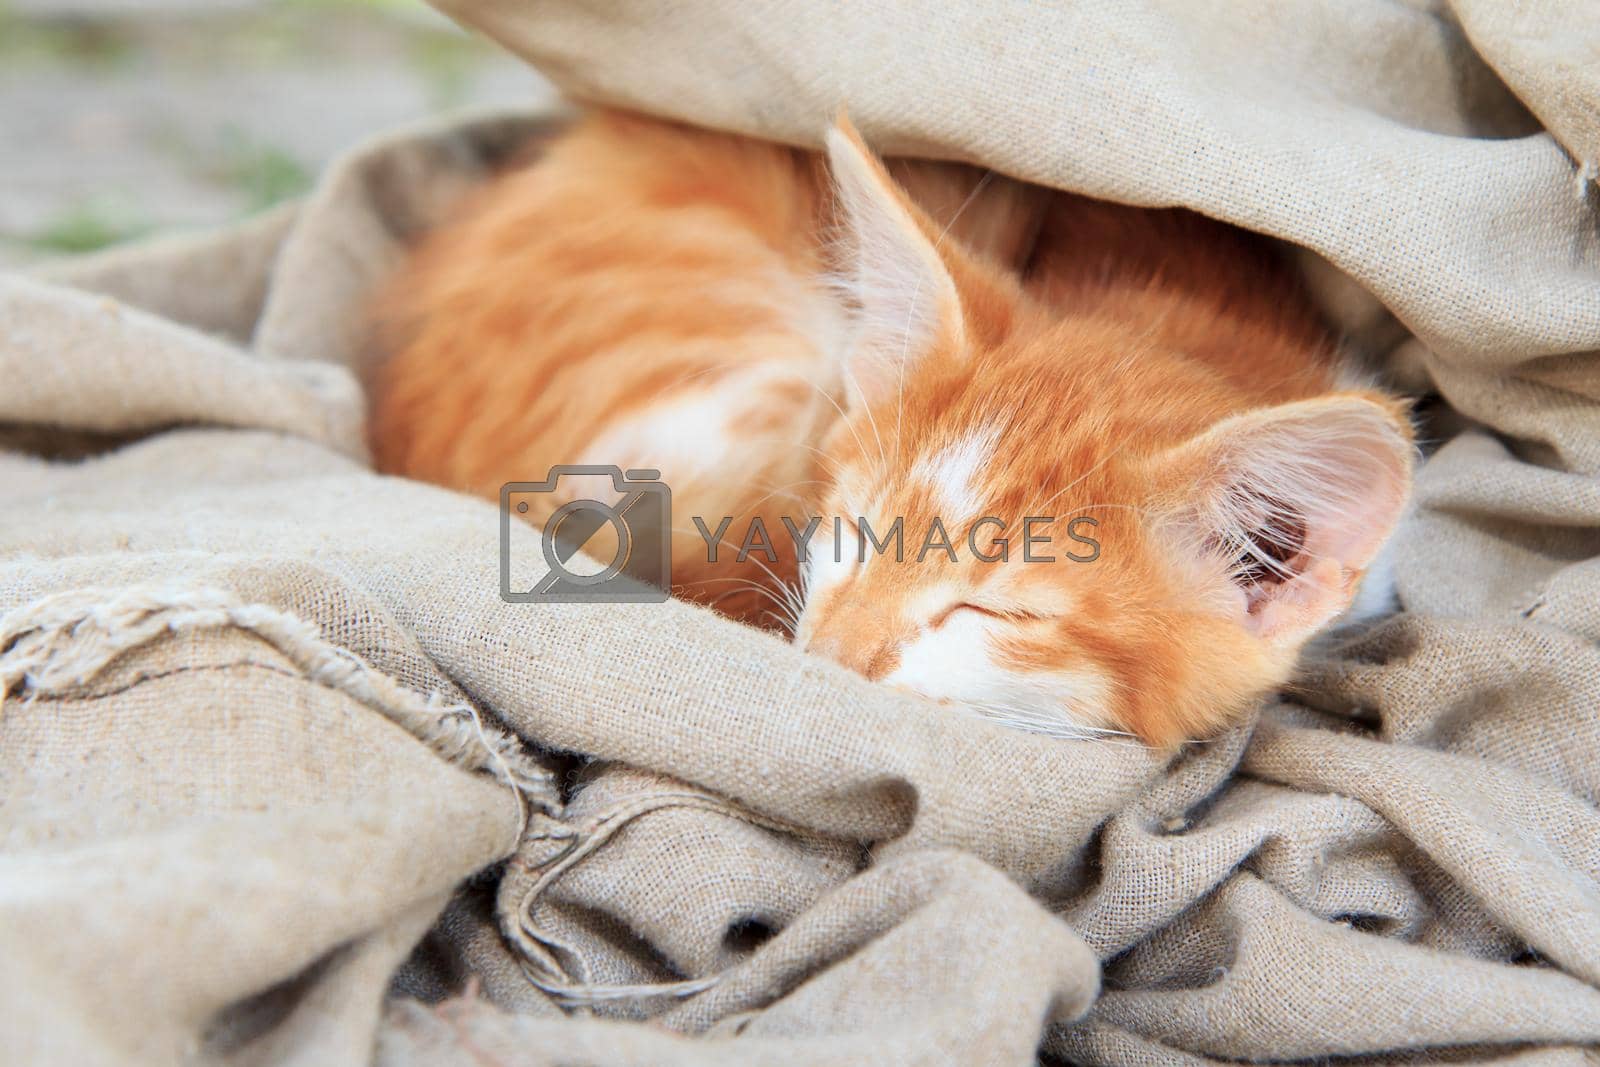 Royalty free image of Little kitty is sleeping in piece of tarpaulin by mvg6894